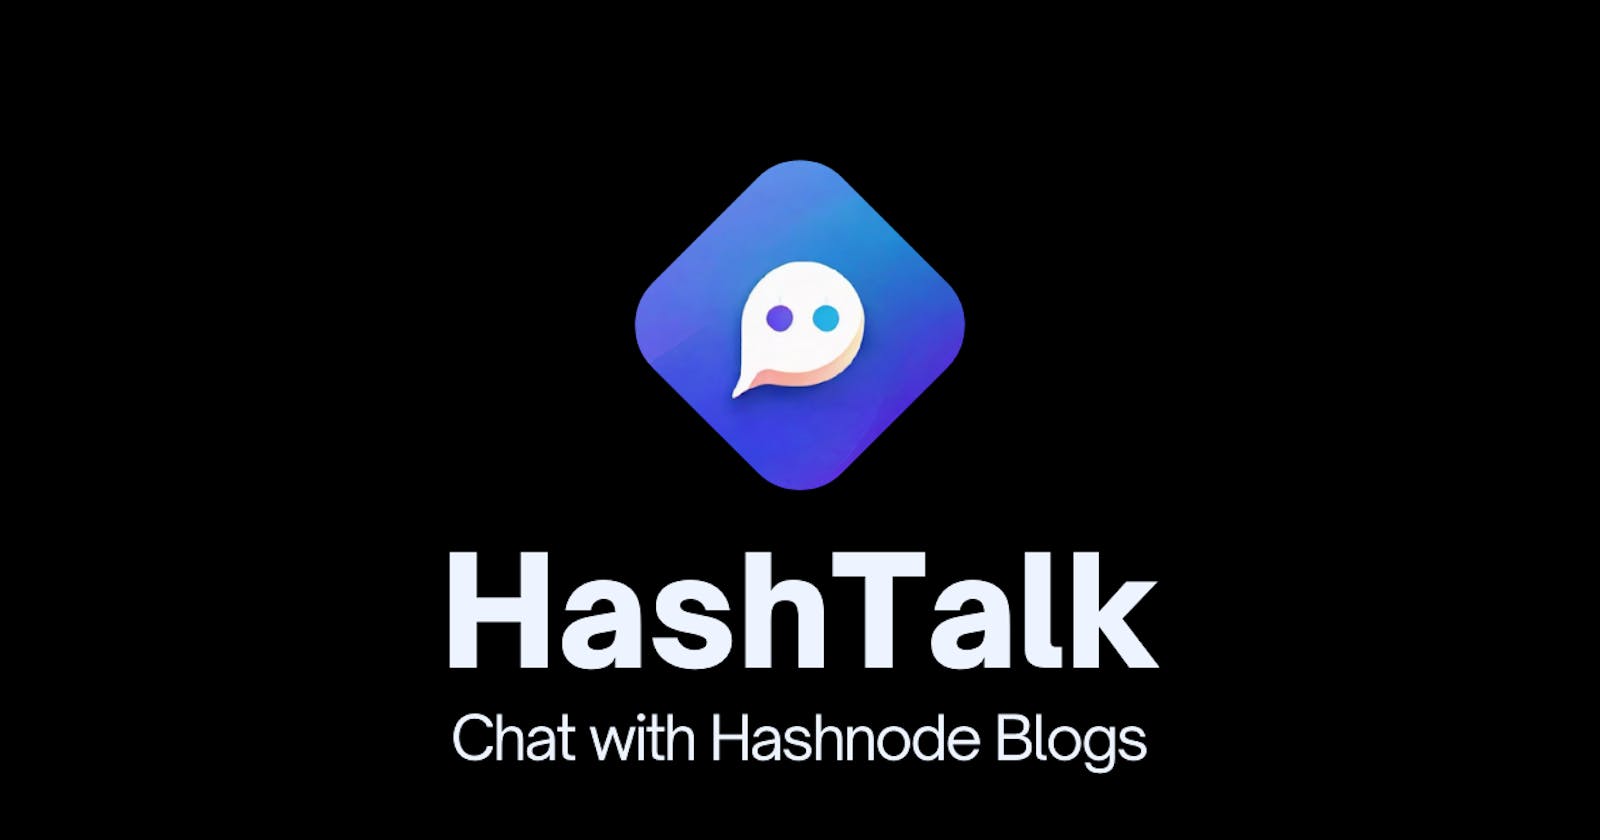 Hashtalk: Engage in Conversations with Hashnode Blogs